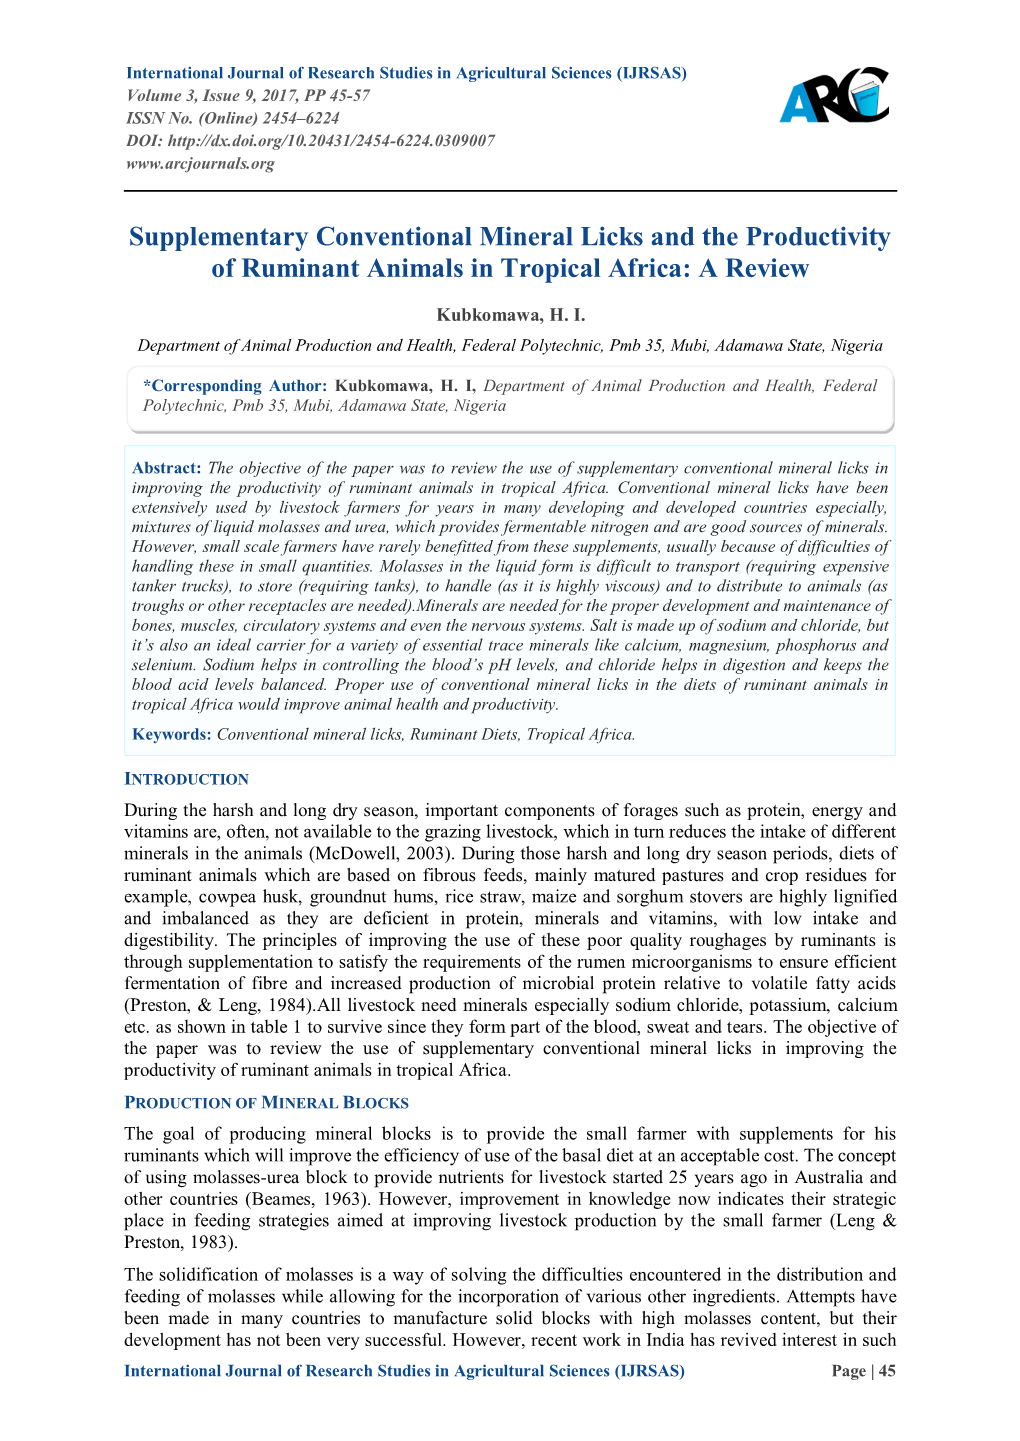 Supplementary Conventional Mineral Licks and the Productivity of Ruminant Animals in Tropical Africa: a Review